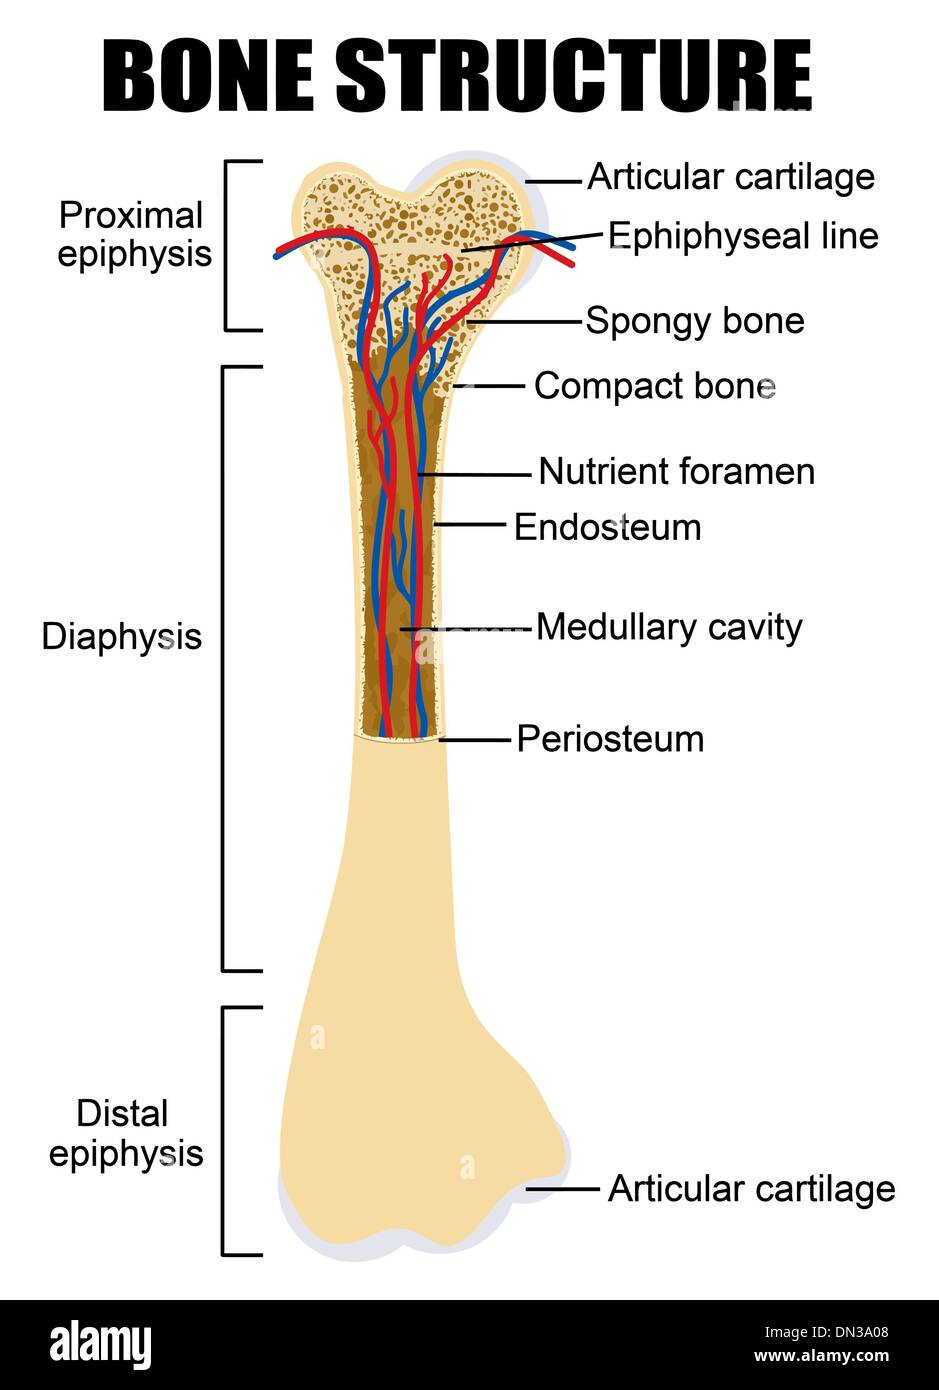 Compact Bone Diagram : Cartilage And Bones Structure Of Bone Anatomy Bones Medical Knowledge - Like compact bone, spongy bone, also known as cancellous bone, contains osteocytes housed in lacunae, but they are not arranged in concentric circles.